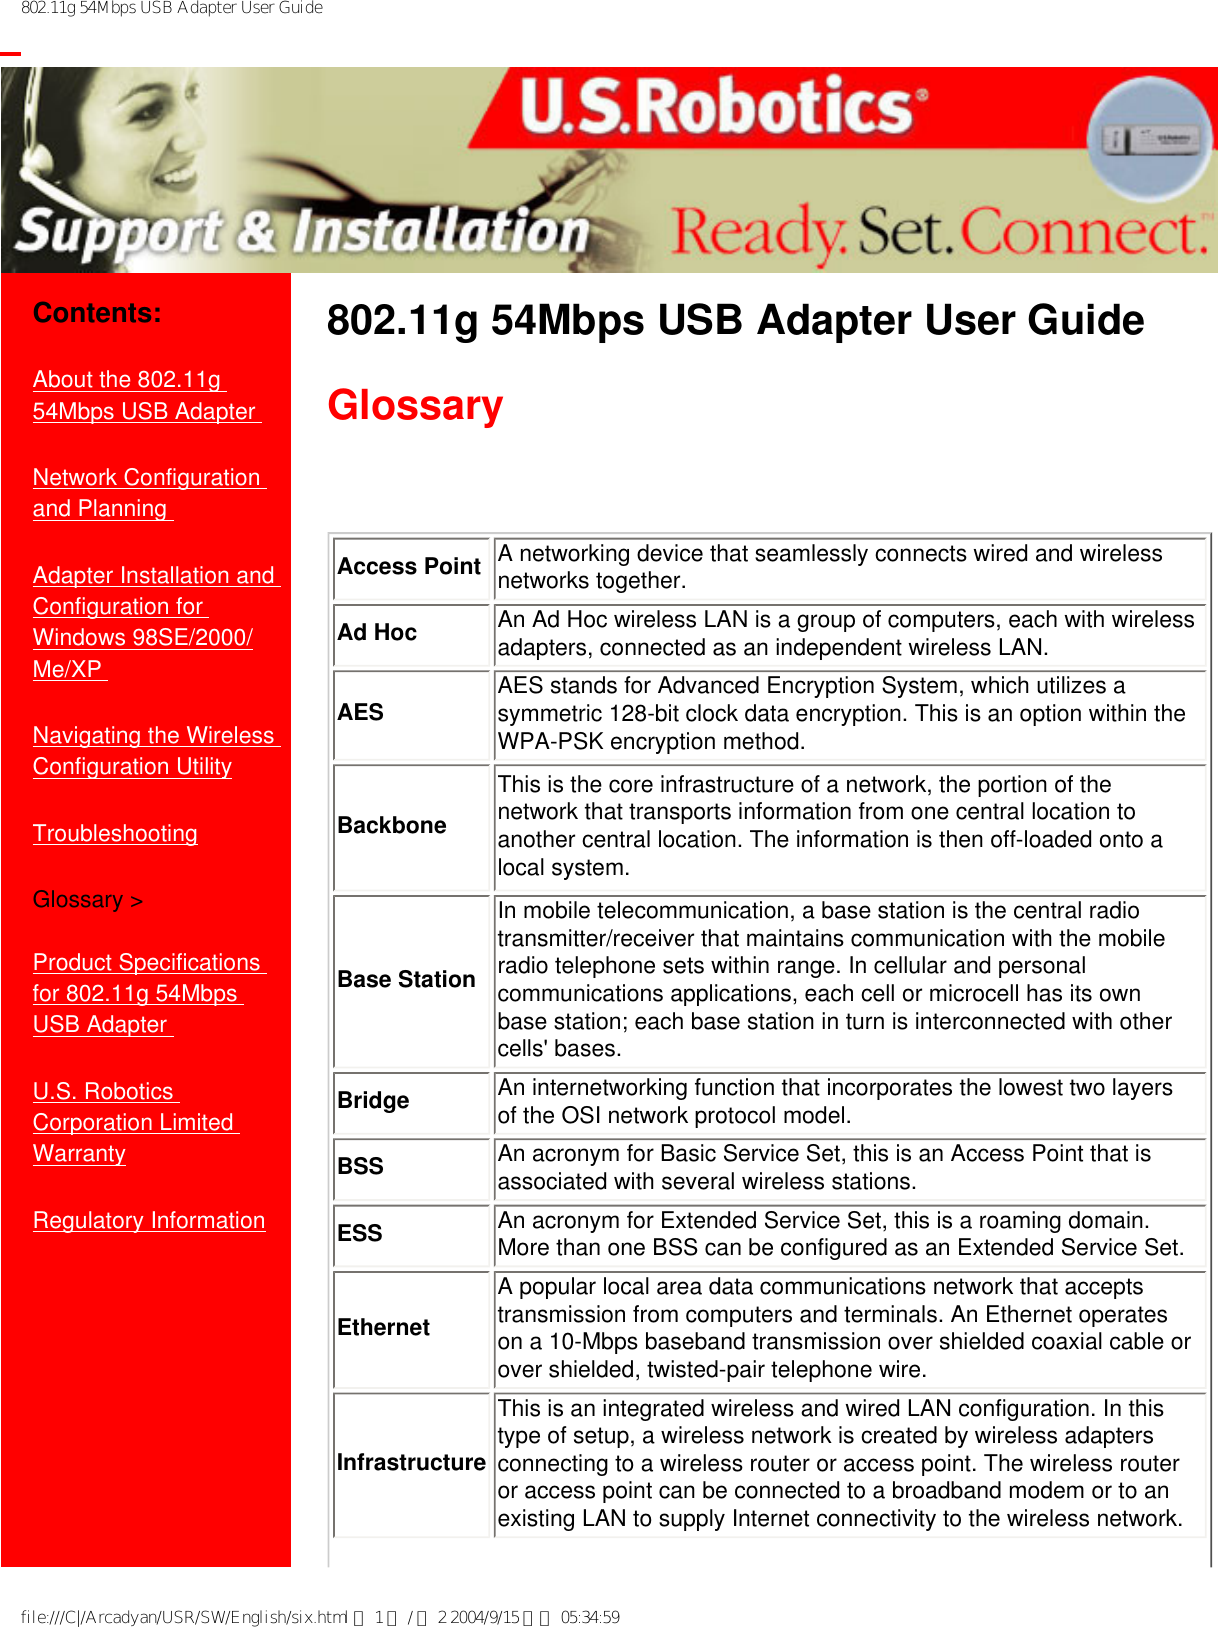 802.11g 54Mbps USB Adapter User Guide           Contents:About the 802.11g 54Mbps USB Adapter Network Configuration and Planning Adapter Installation and Configuration for Windows 98SE/2000/Me/XP Navigating the Wireless Configuration UtilityTroubleshootingGlossary &gt;Product Specifications for 802.11g 54Mbps USB Adapter U.S. Robotics Corporation Limited Warranty Regulatory Information802.11g 54Mbps USB Adapter User Guide Glossary  Access Point A networking device that seamlessly connects wired and wireless networks together.Ad Hoc An Ad Hoc wireless LAN is a group of computers, each with wireless adapters, connected as an independent wireless LAN.AES AES stands for Advanced Encryption System, which utilizes a symmetric 128-bit clock data encryption. This is an option within the WPA-PSK encryption method.BackboneThis is the core infrastructure of a network, the portion of the network that transports information from one central location to another central location. The information is then off-loaded onto a local system.Base StationIn mobile telecommunication, a base station is the central radio transmitter/receiver that maintains communication with the mobile radio telephone sets within range. In cellular and personal communications applications, each cell or microcell has its own base station; each base station in turn is interconnected with other cells&apos; bases.Bridge An internetworking function that incorporates the lowest two layers of the OSI network protocol model.BSS An acronym for Basic Service Set, this is an Access Point that is associated with several wireless stations.ESS An acronym for Extended Service Set, this is a roaming domain. More than one BSS can be configured as an Extended Service Set.EthernetA popular local area data communications network that accepts transmission from computers and terminals. An Ethernet operates on a 10-Mbps baseband transmission over shielded coaxial cable or over shielded, twisted-pair telephone wire.InfrastructureThis is an integrated wireless and wired LAN configuration. In this type of setup, a wireless network is created by wireless adapters connecting to a wireless router or access point. The wireless router or access point can be connected to a broadband modem or to an existing LAN to supply Internet connectivity to the wireless network.file:///C|/Arcadyan/USR/SW/English/six.html 第 1 頁 / 共 2 2004/9/15 下午 05:34:59